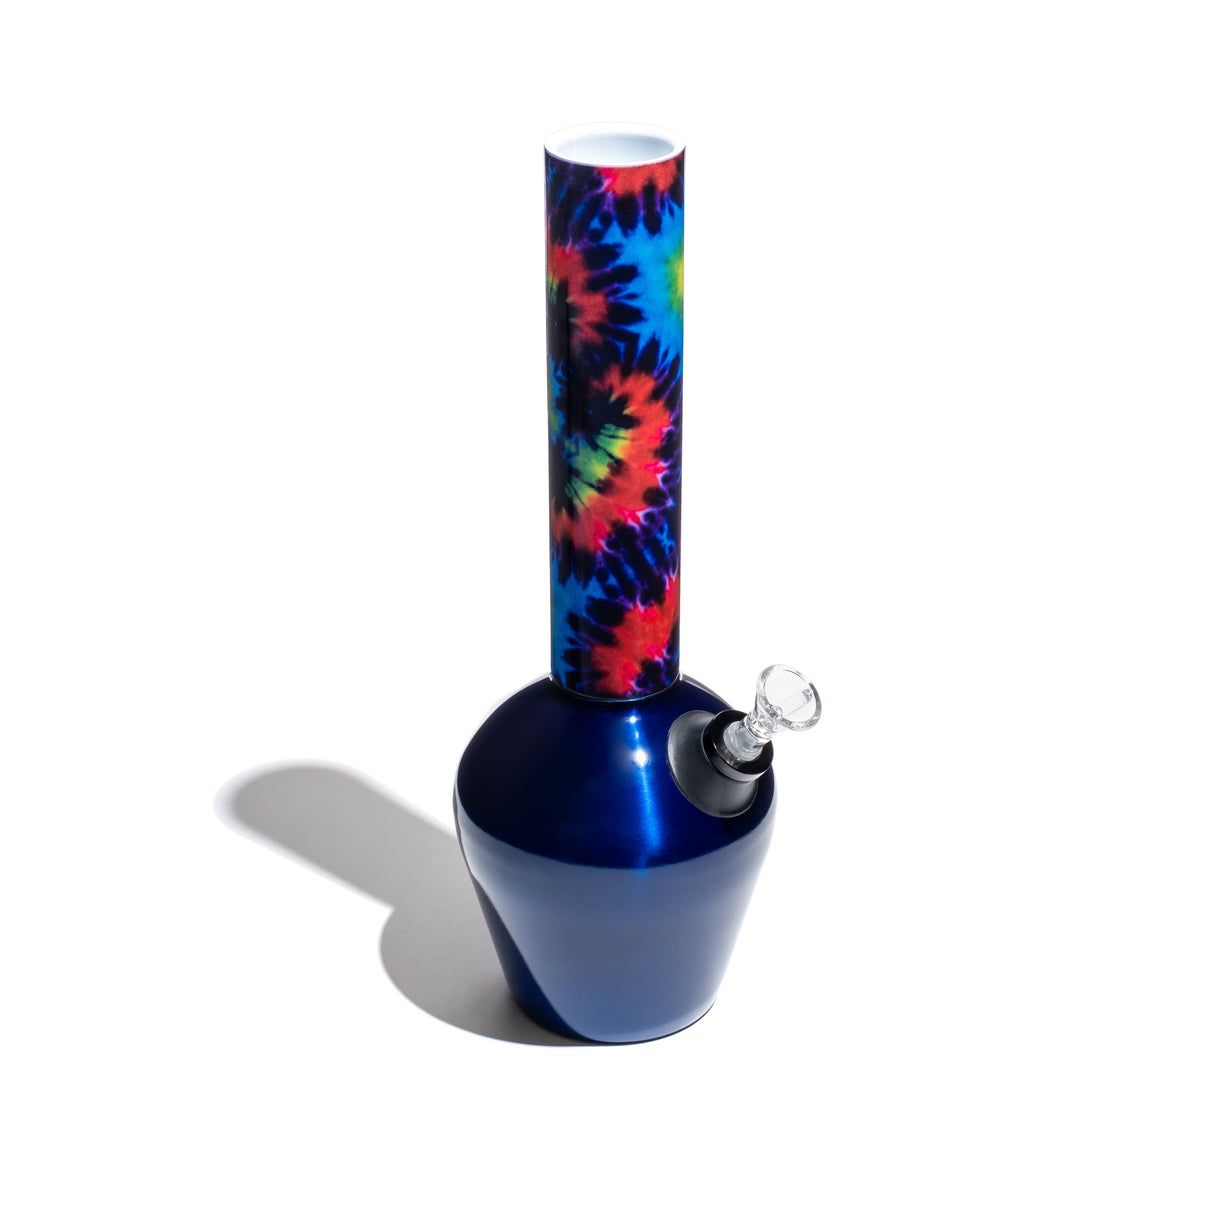 Chill Steel Pipes Mix & Match Bong with Gloss Blue Base and Colorful Tube - Top View